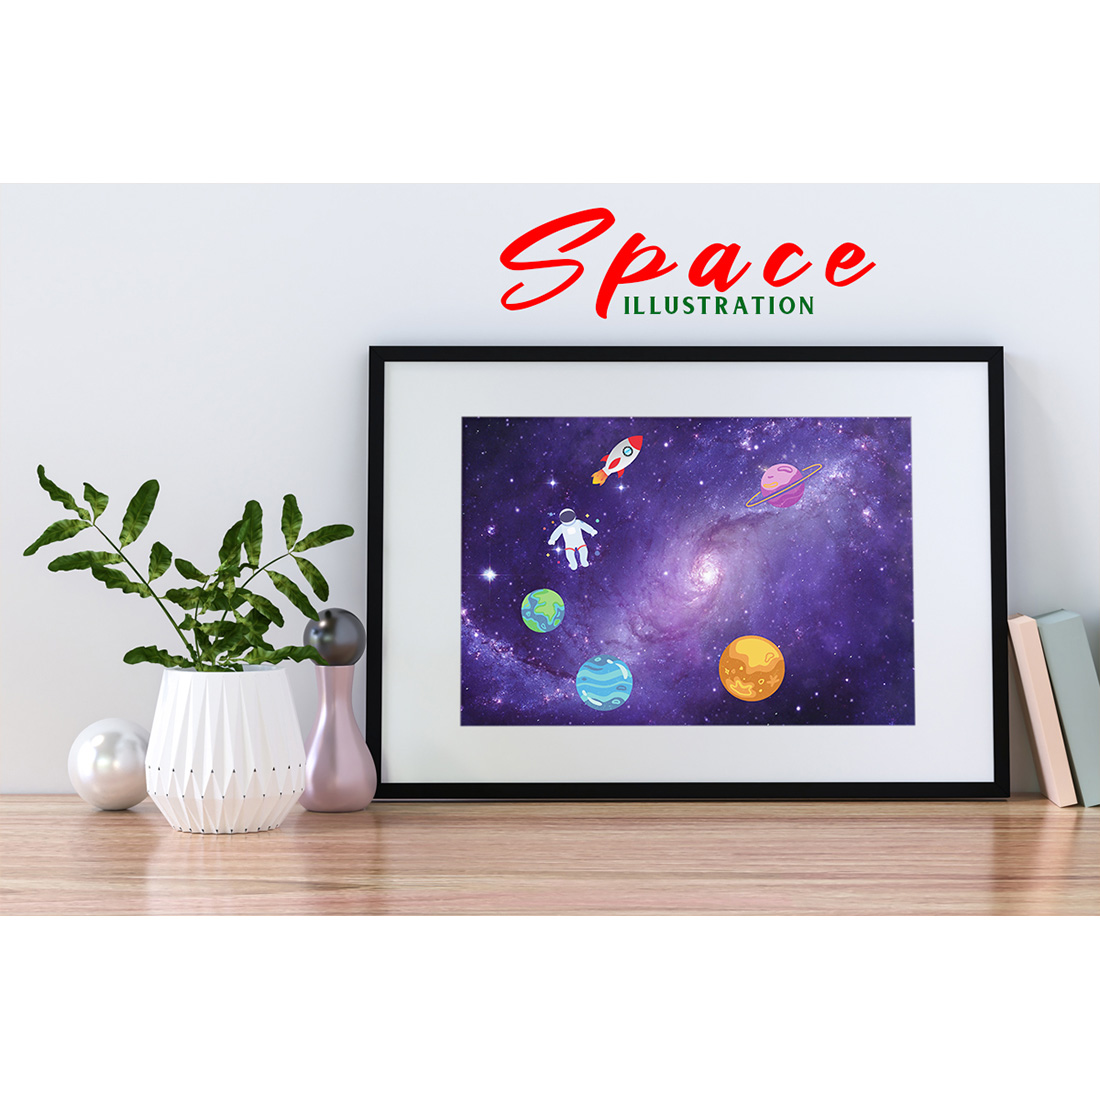 Elegant image on the theme of space in a frame